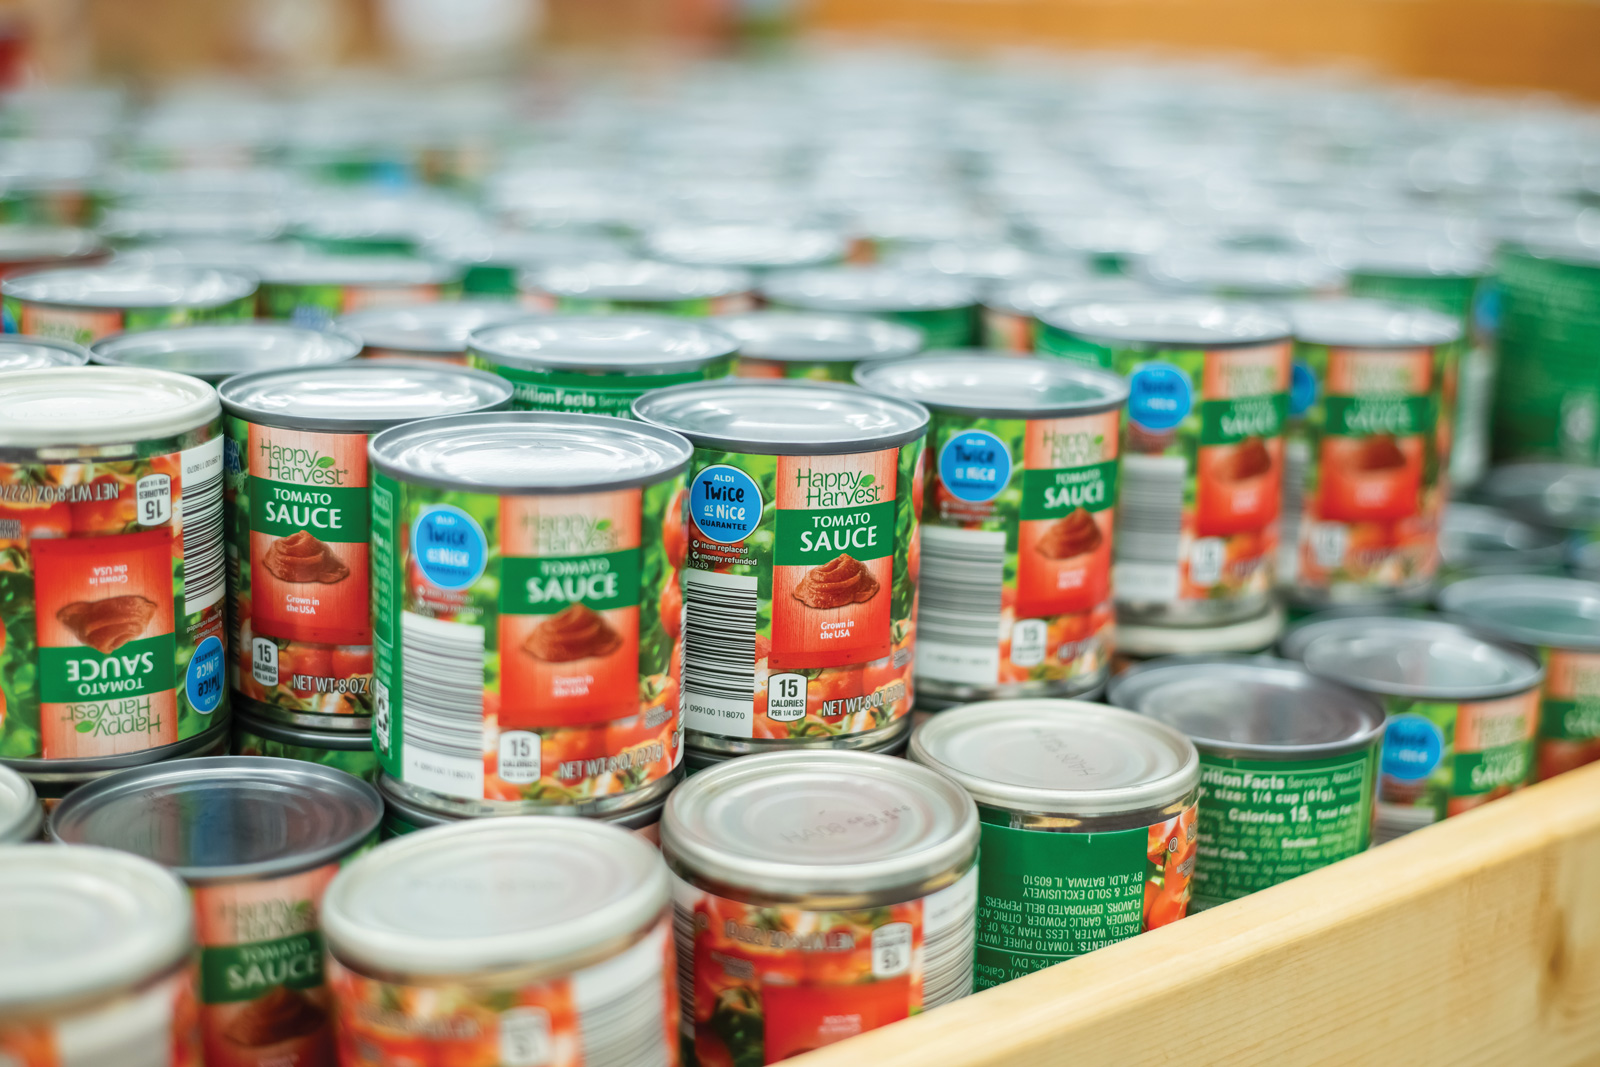 Product display of canned tomato sauce